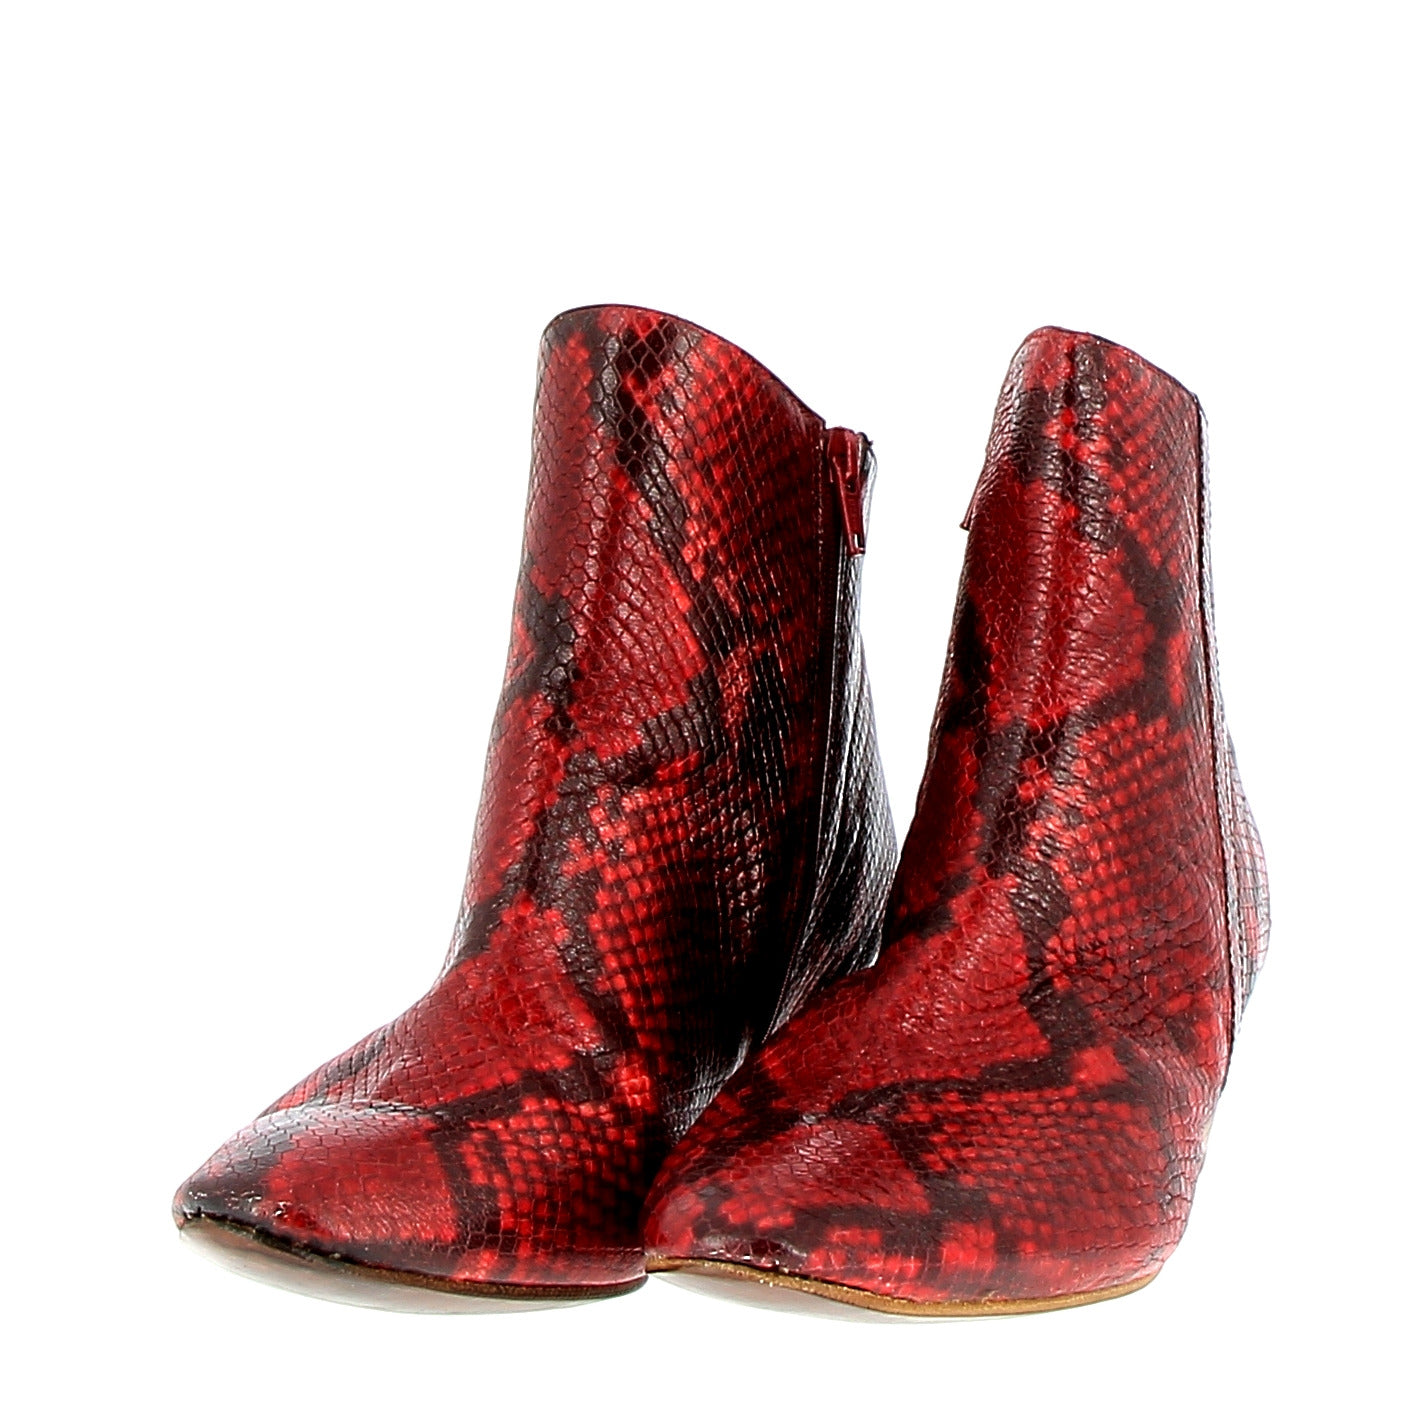 Red snake boot